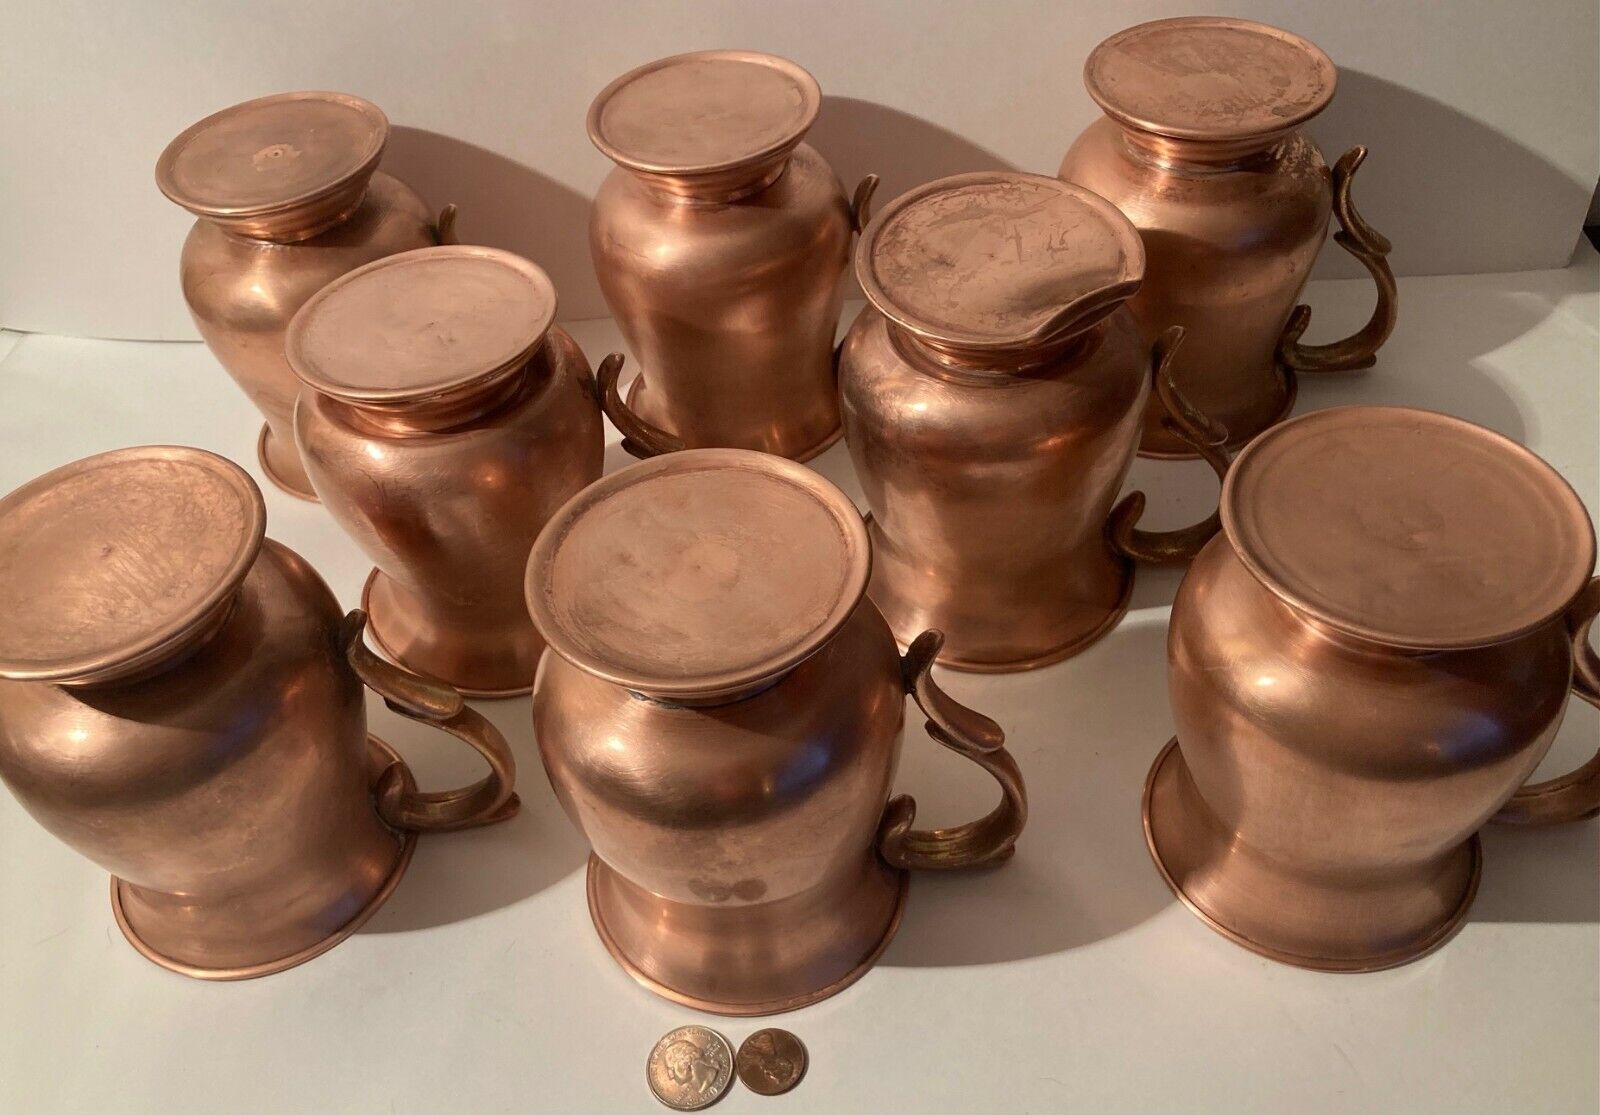 8 Vintage Copper Mugs, Steins, Cups, Moscow Mule, Big Size, 5 1/2